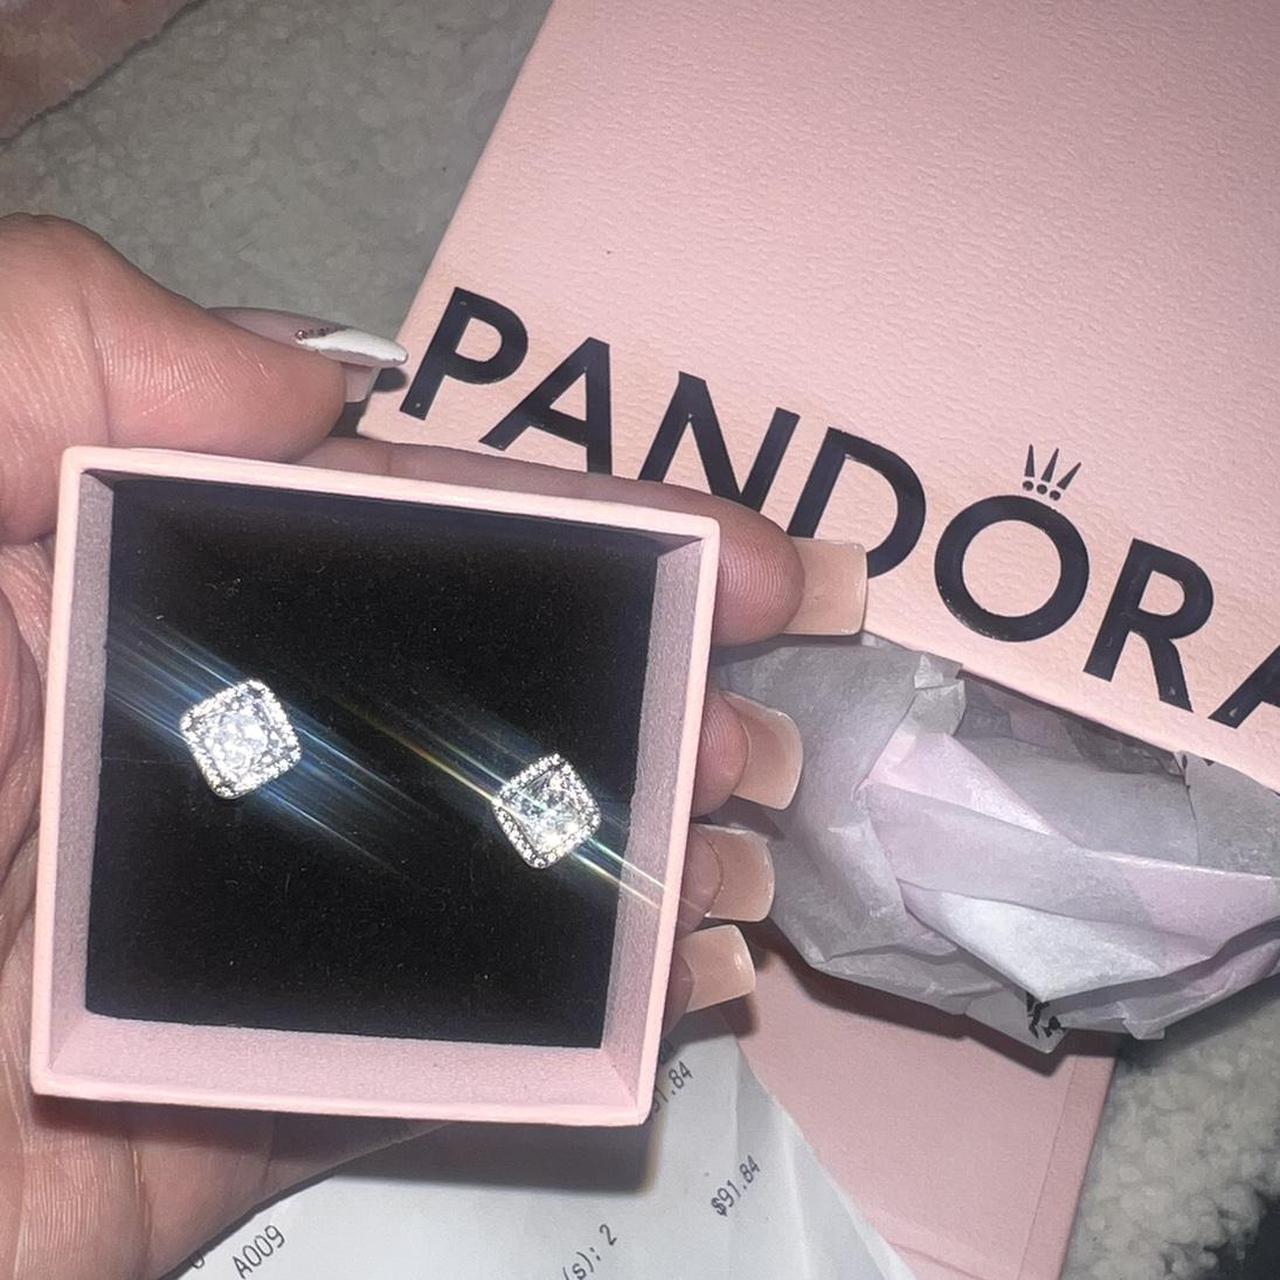 Brand new Pandora earrings, worn once bought for $80 - Depop